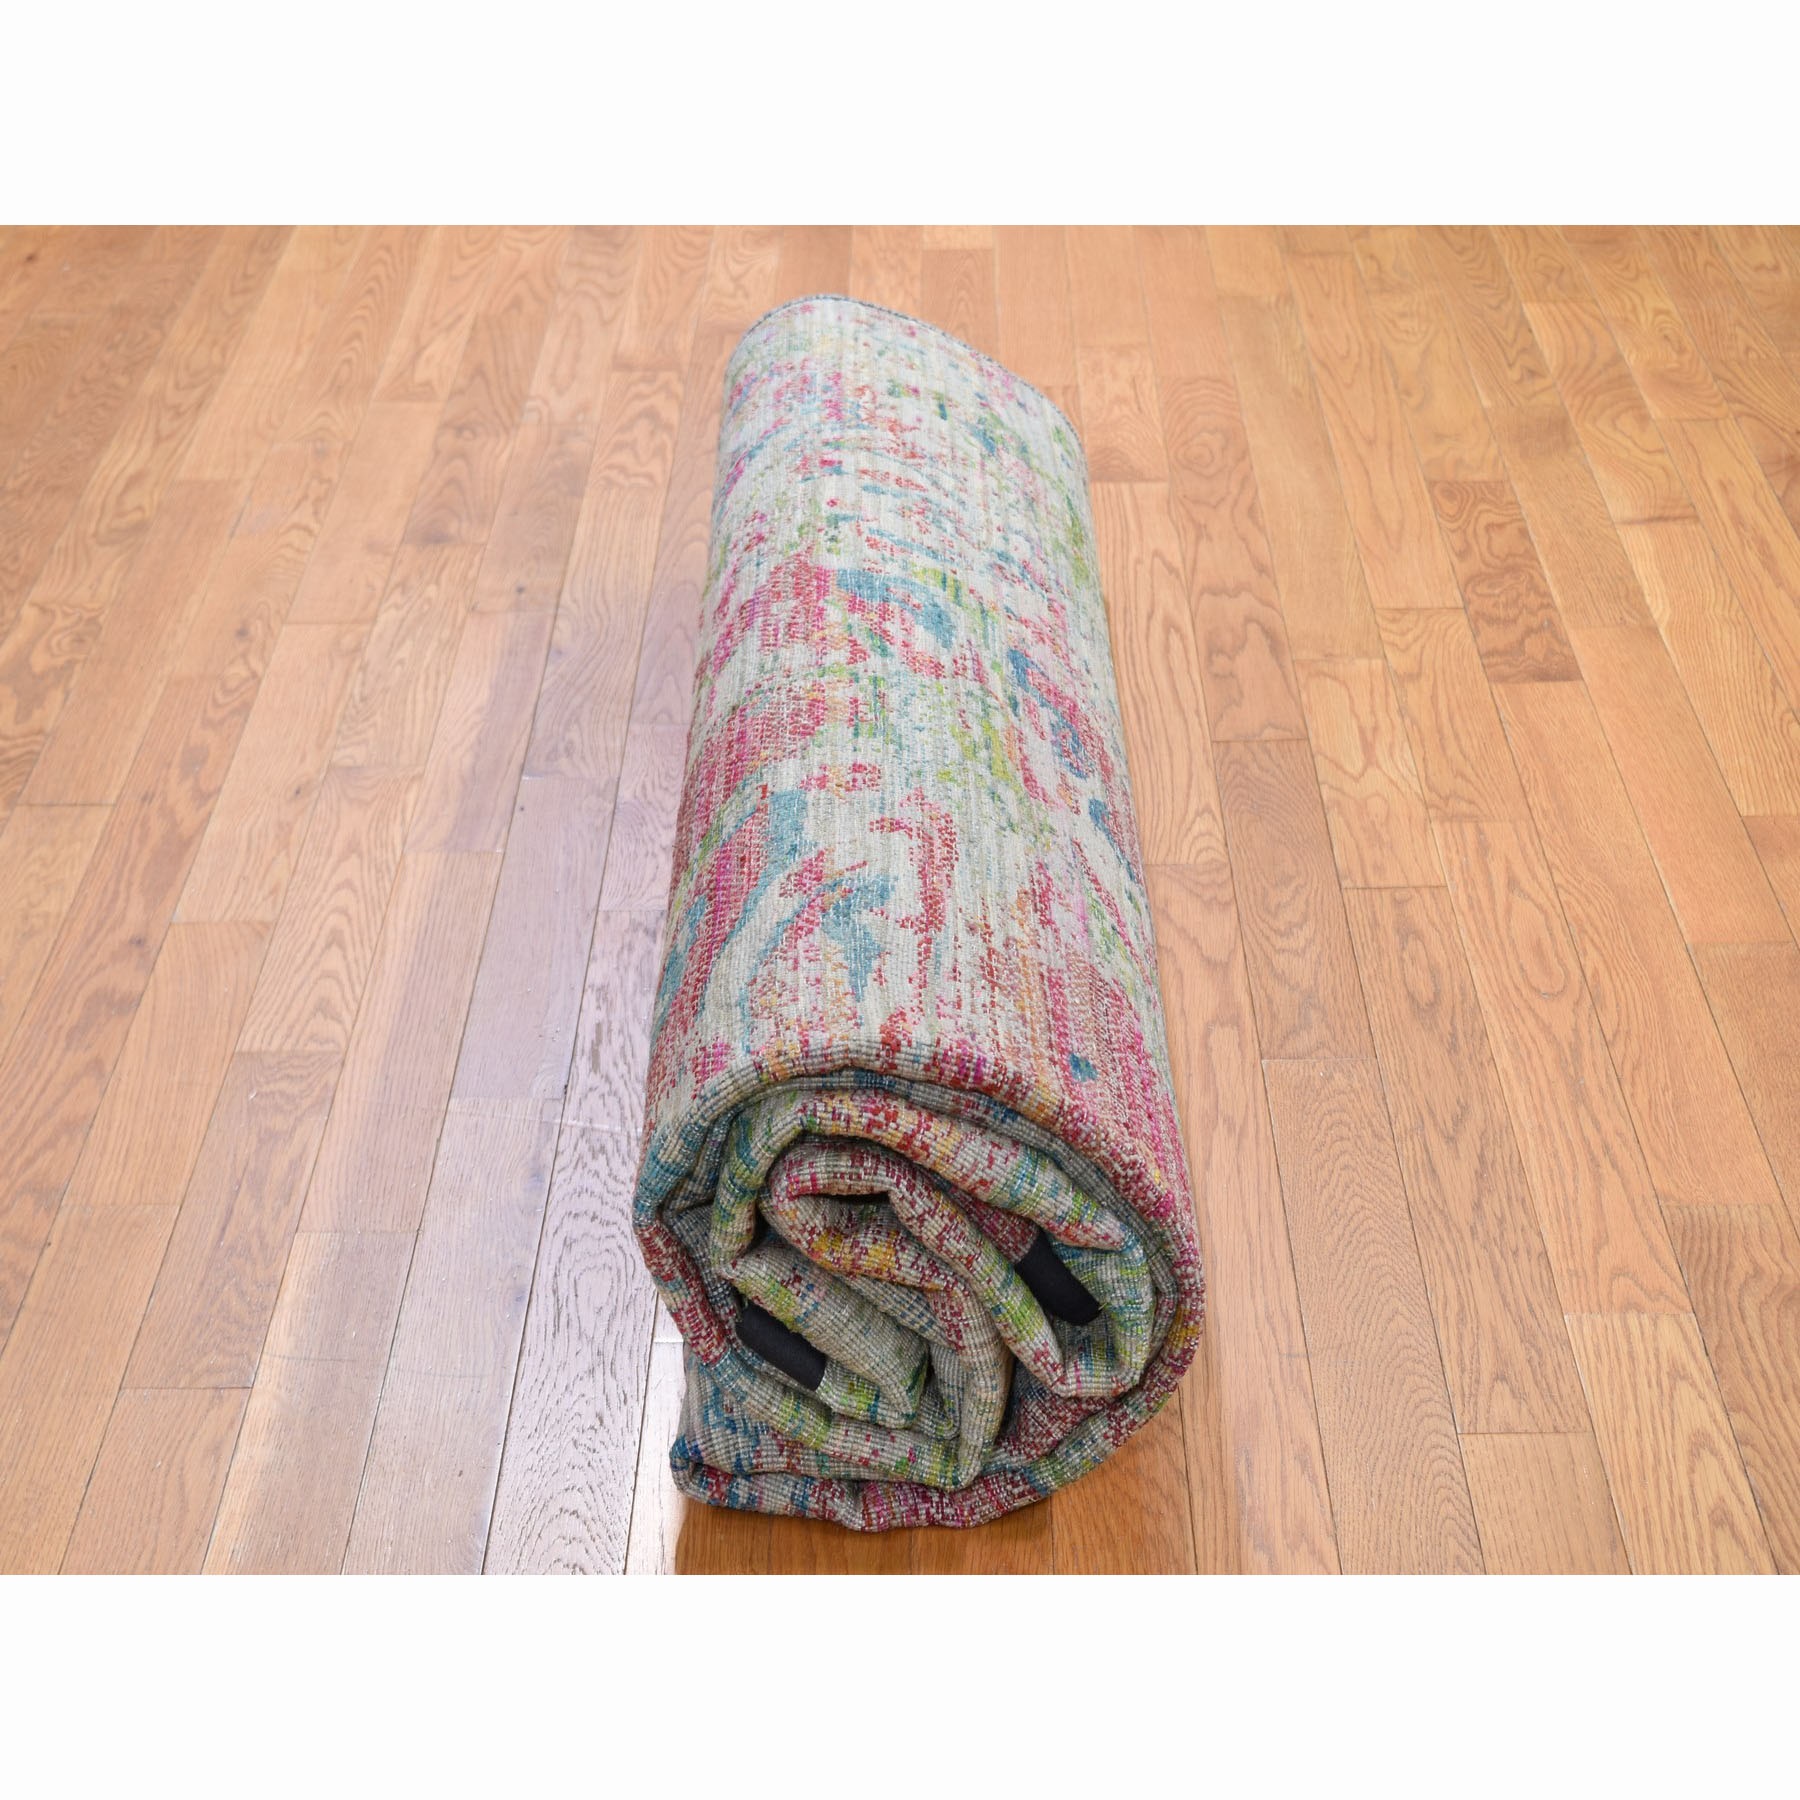 8-10 x12-2  Colorful Abstract Design Sari Silk With Textured Wool Hand Knotted Oriental Rug 